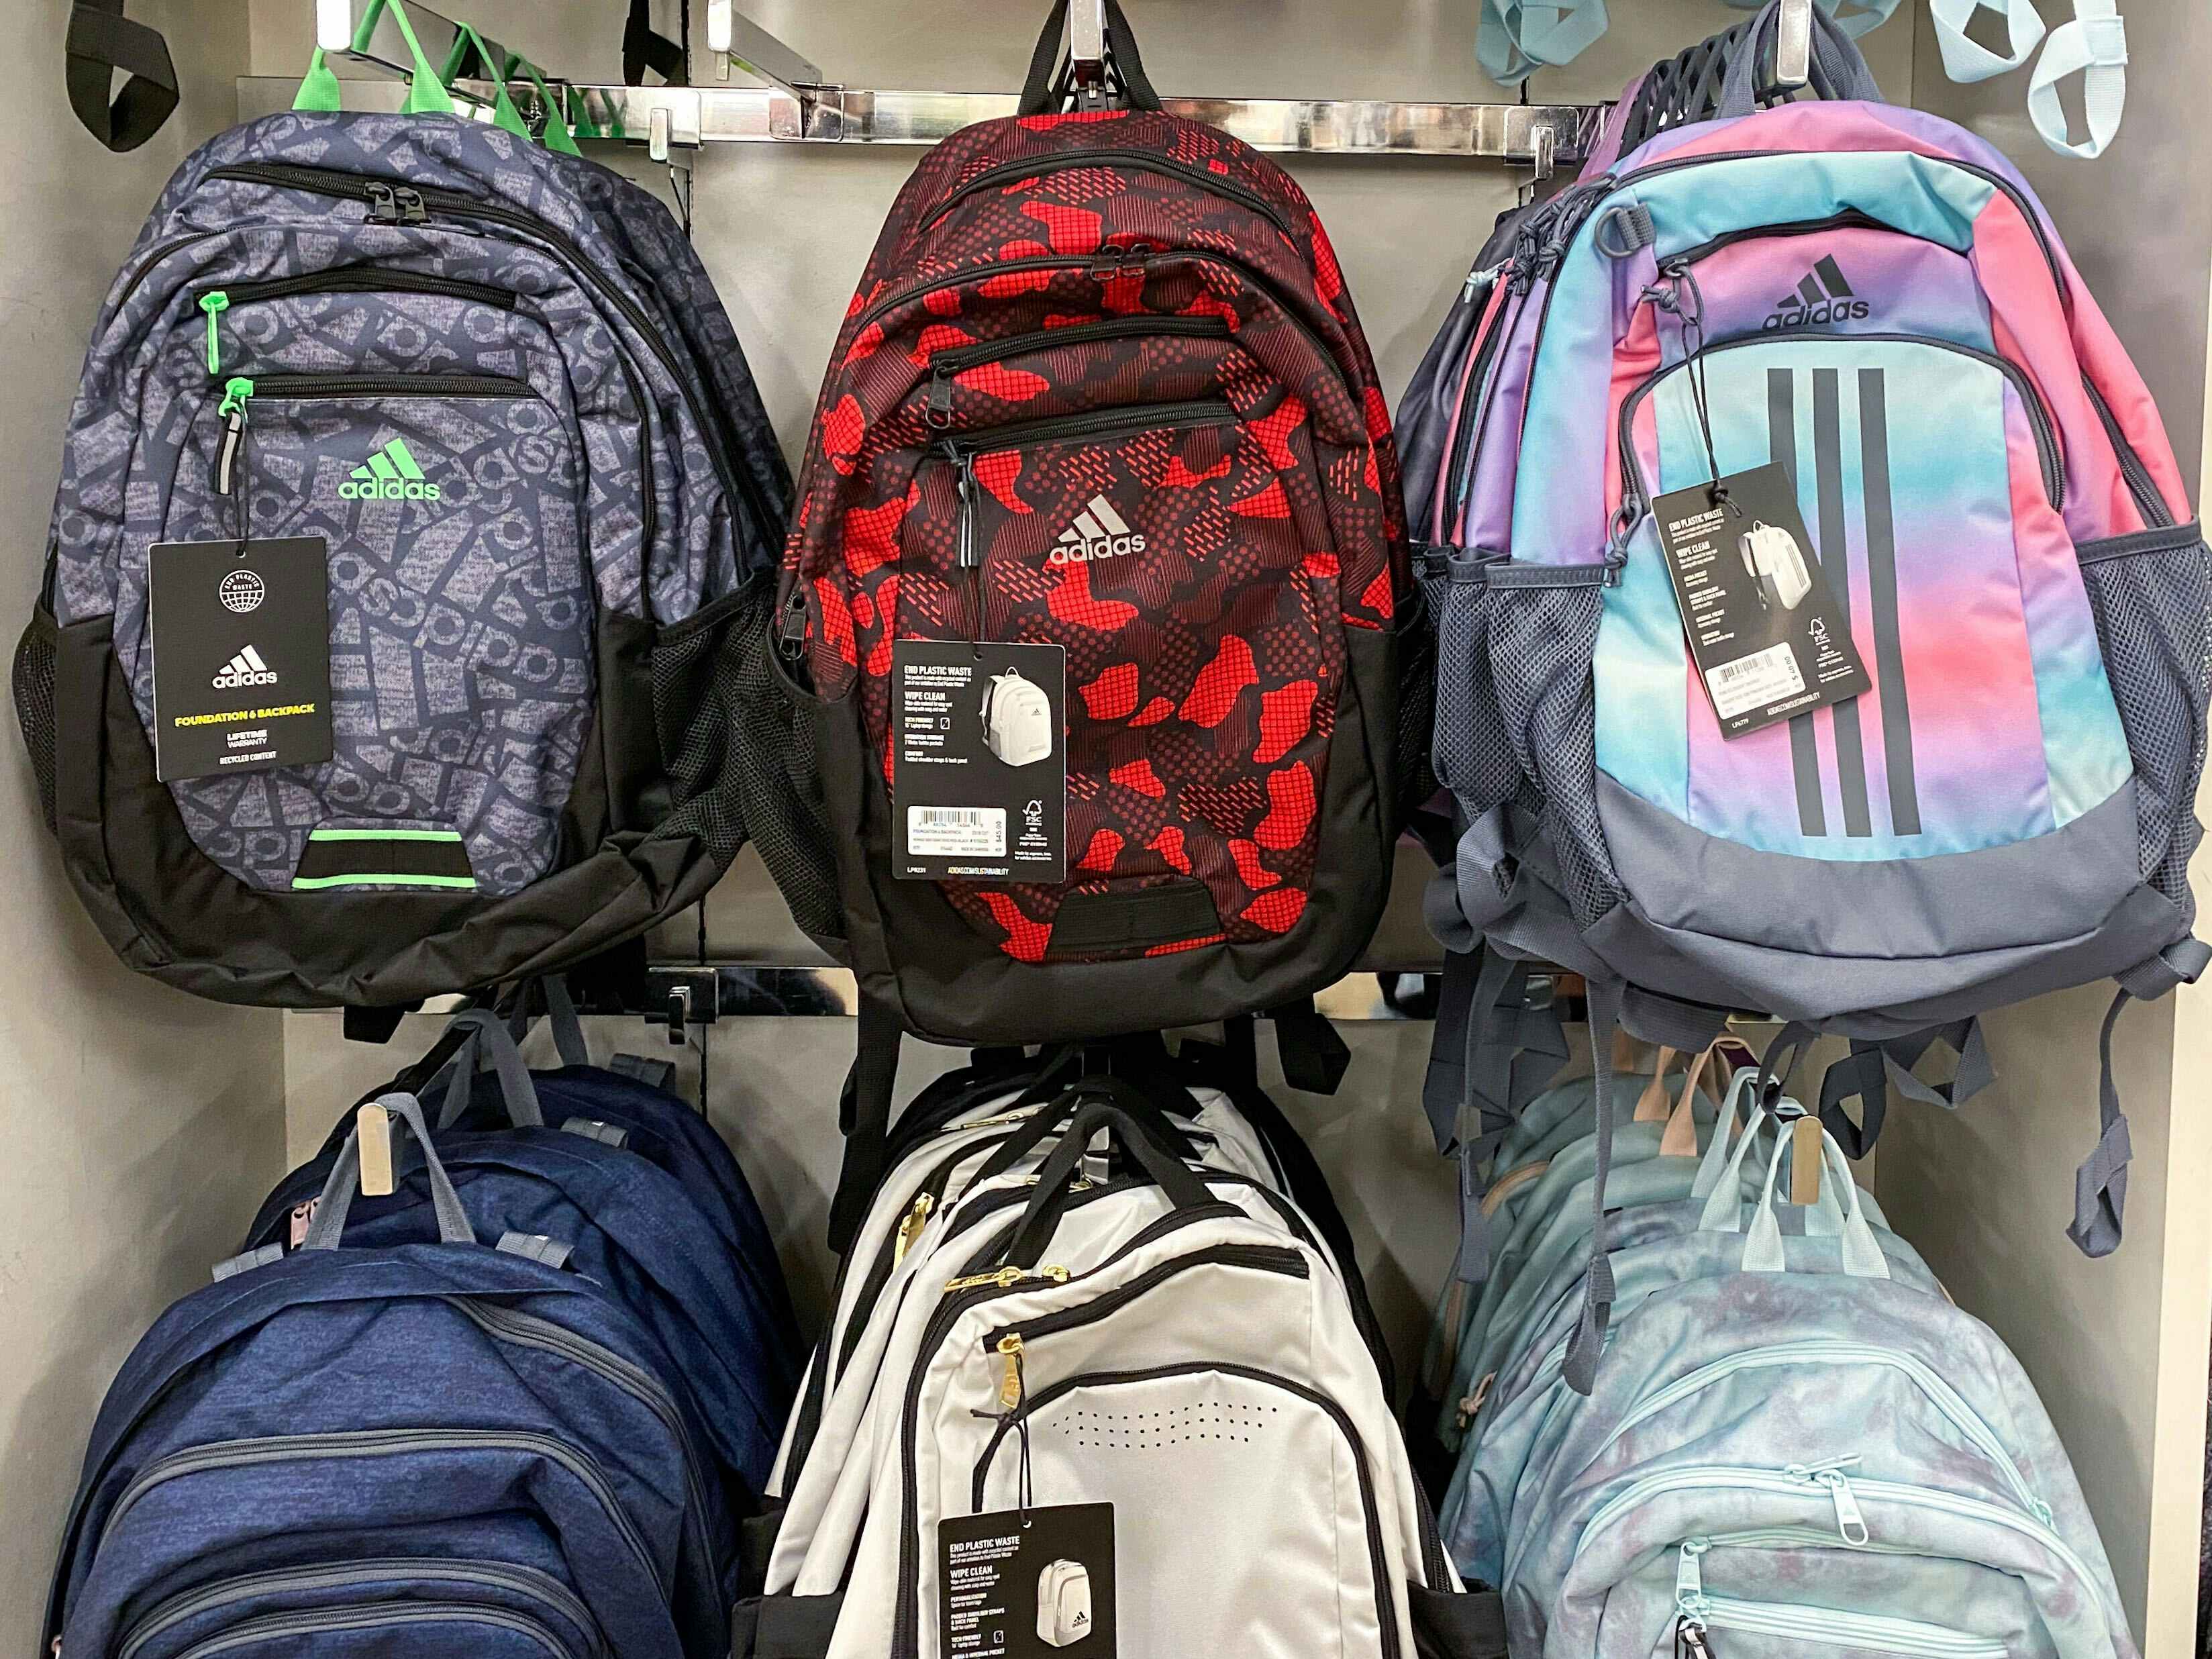 Some adidas backpacks hanging on display inside a store.